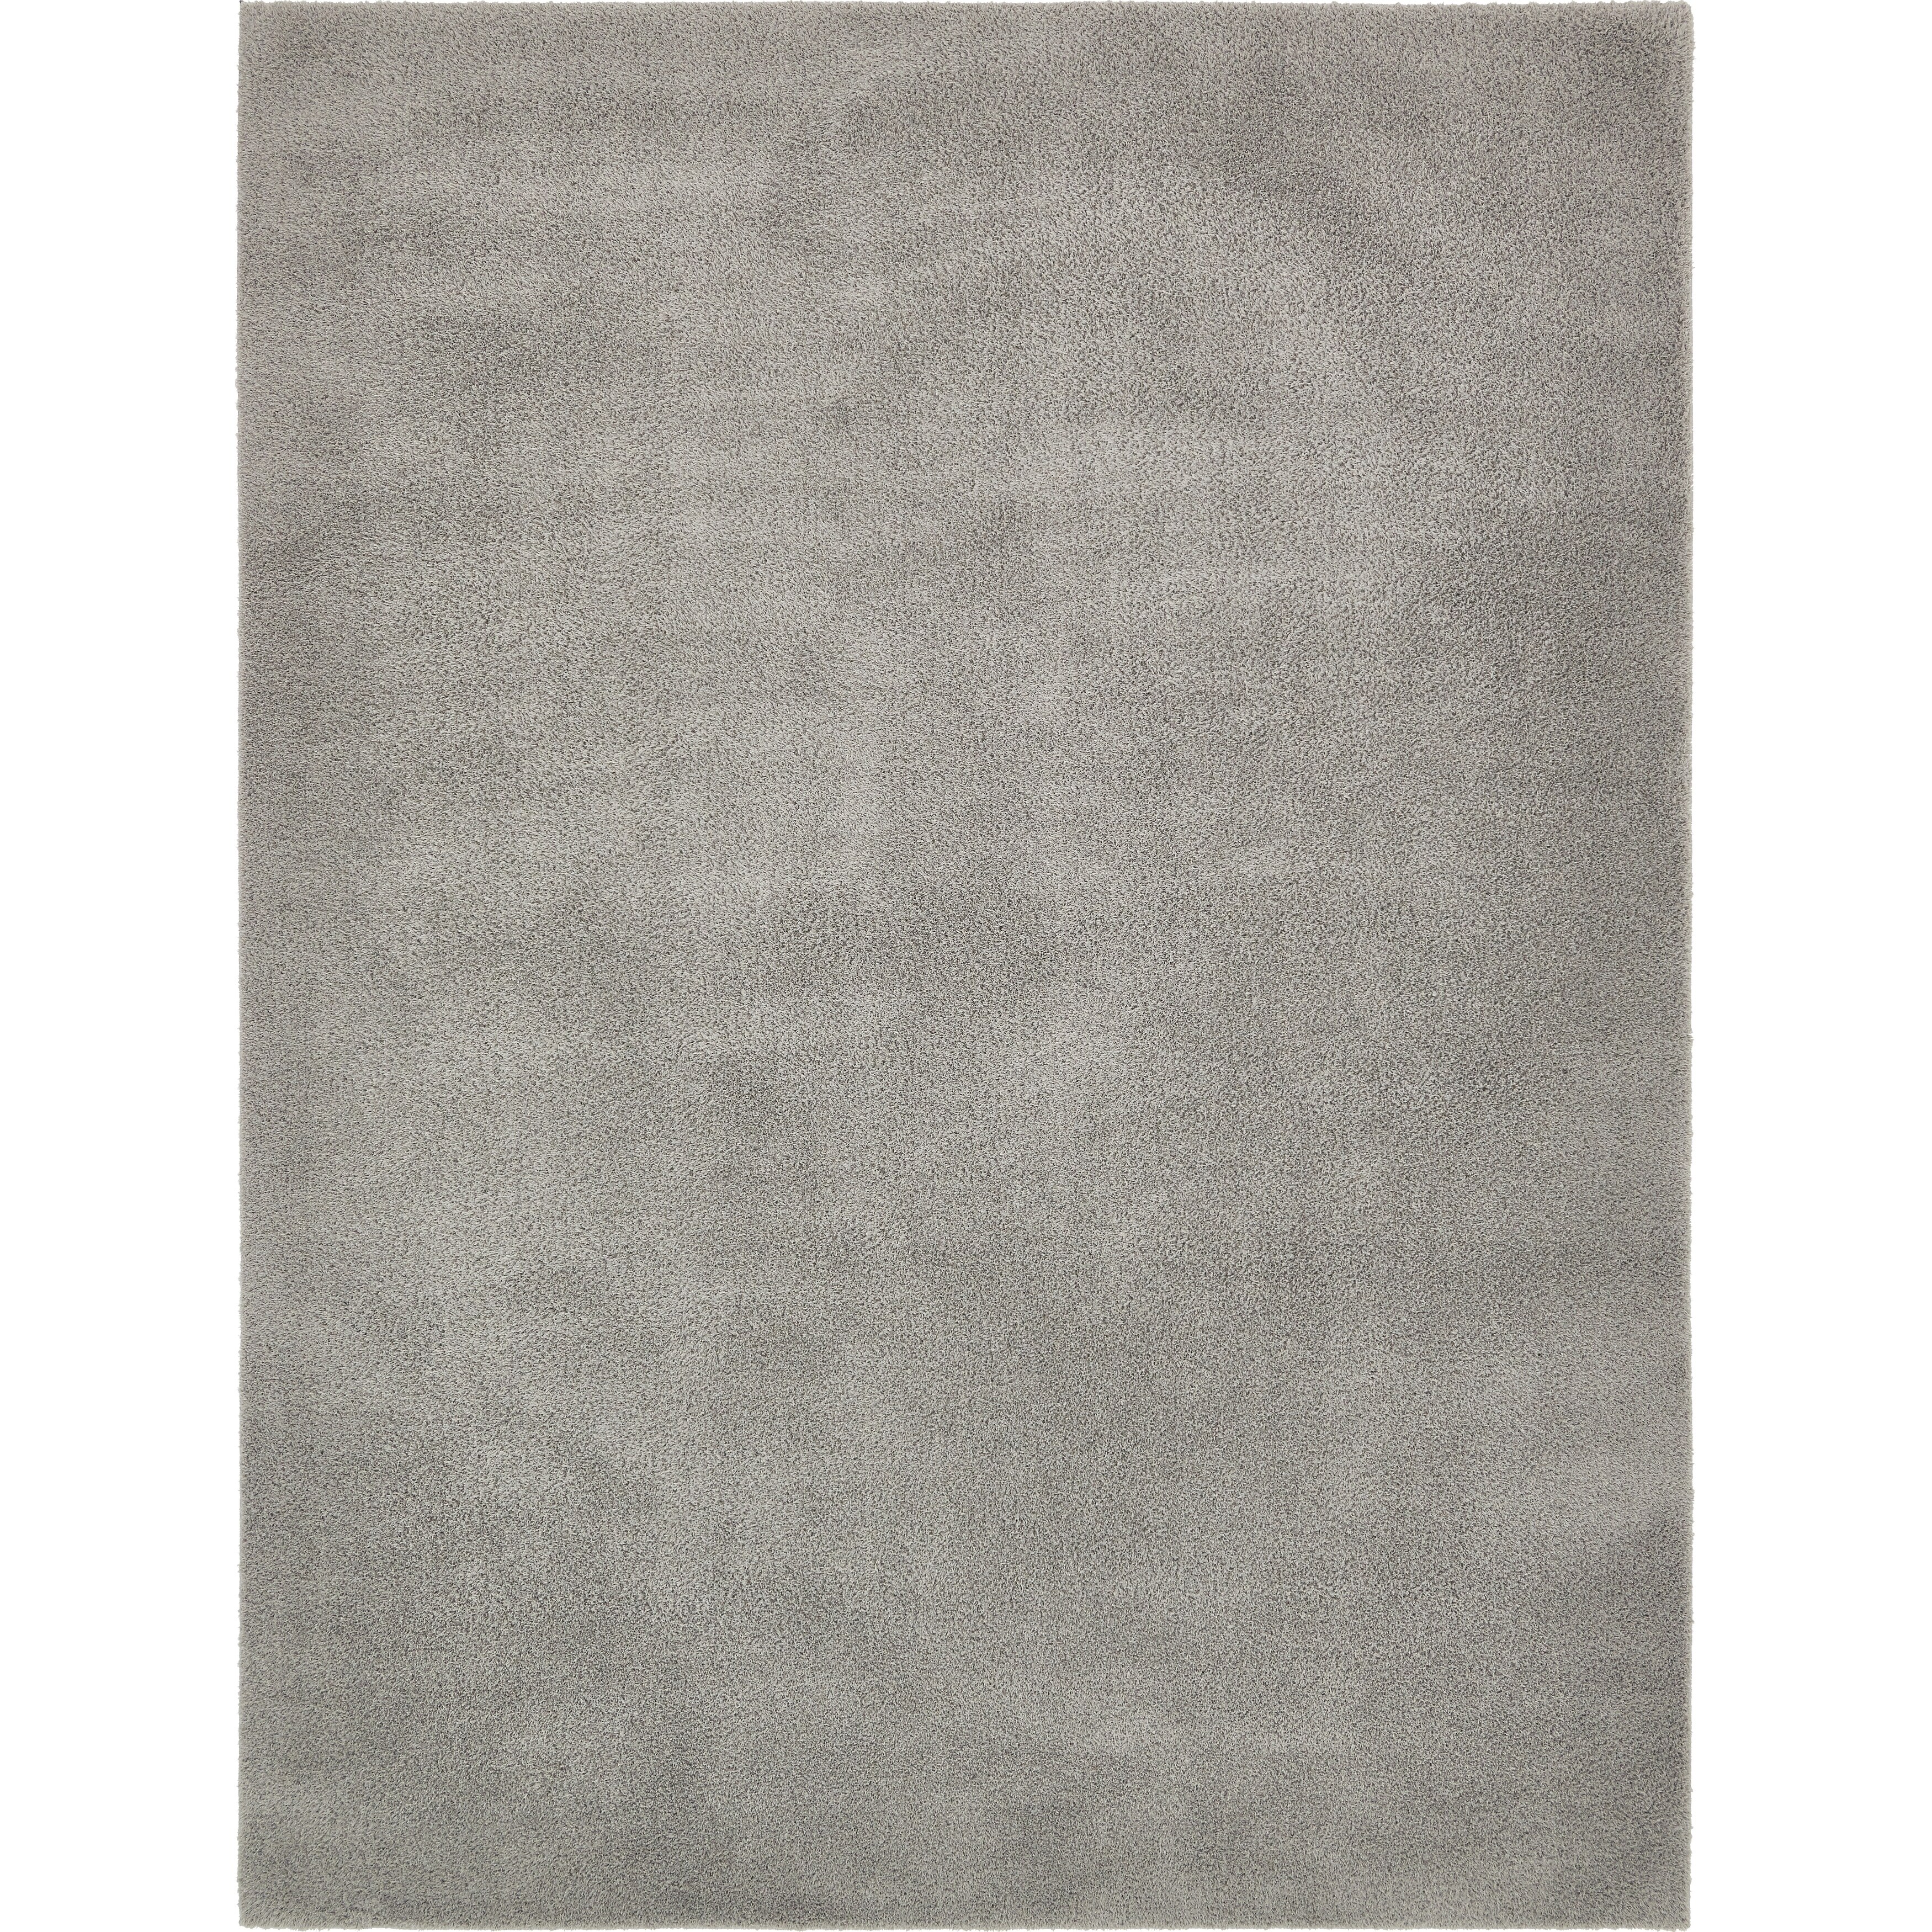 Buy Grey Solid Area Rugs Online At Overstockcom Our Best Rugs Deals